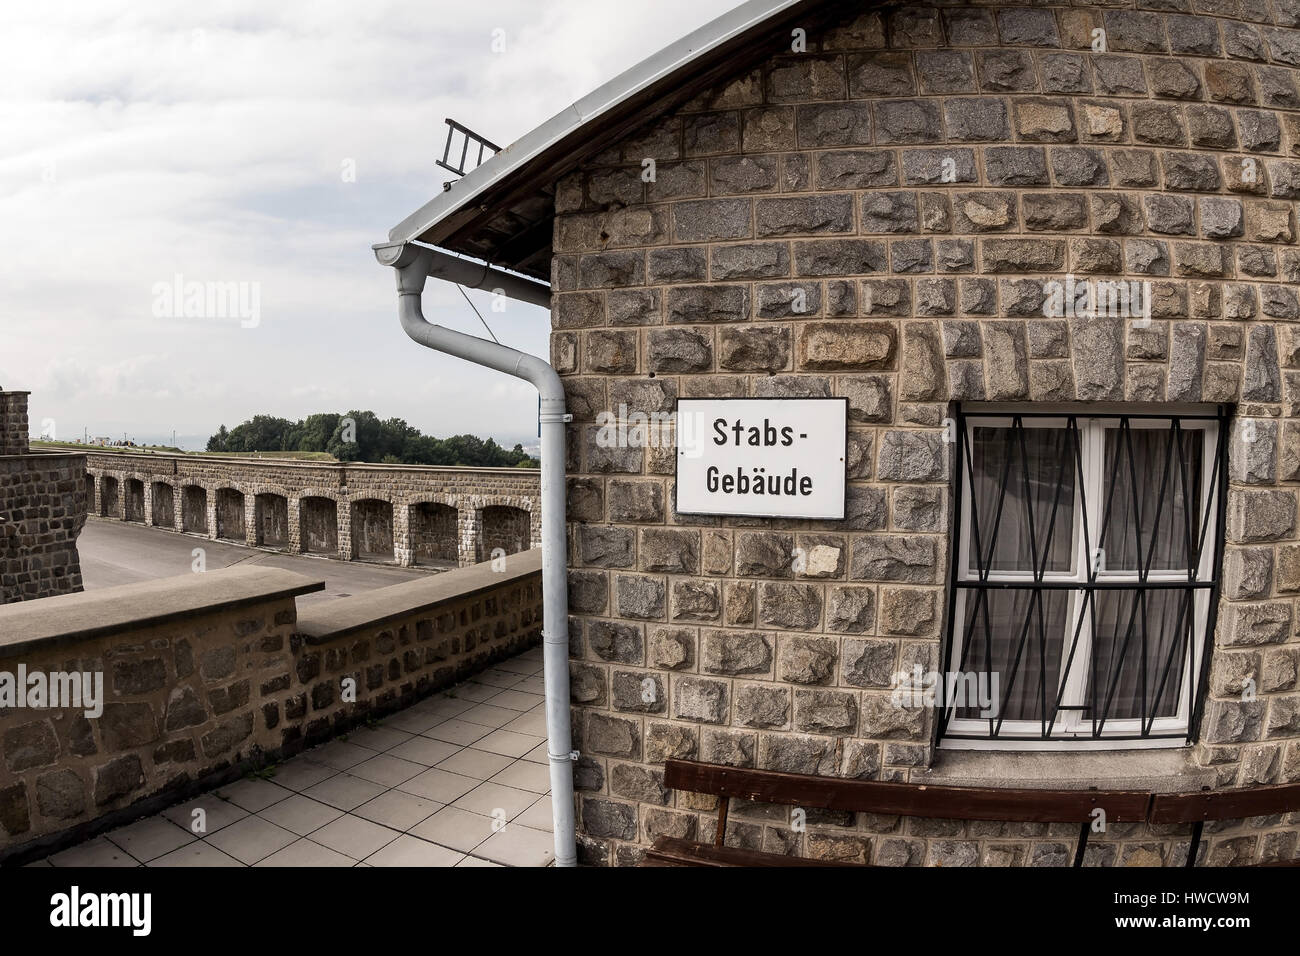 The concentration camp Mauthausen in Austria. Concentration camp of the step III from 1938 to 1945, Das Konzentrationslager Mauthausen in Österreich.  Stock Photo